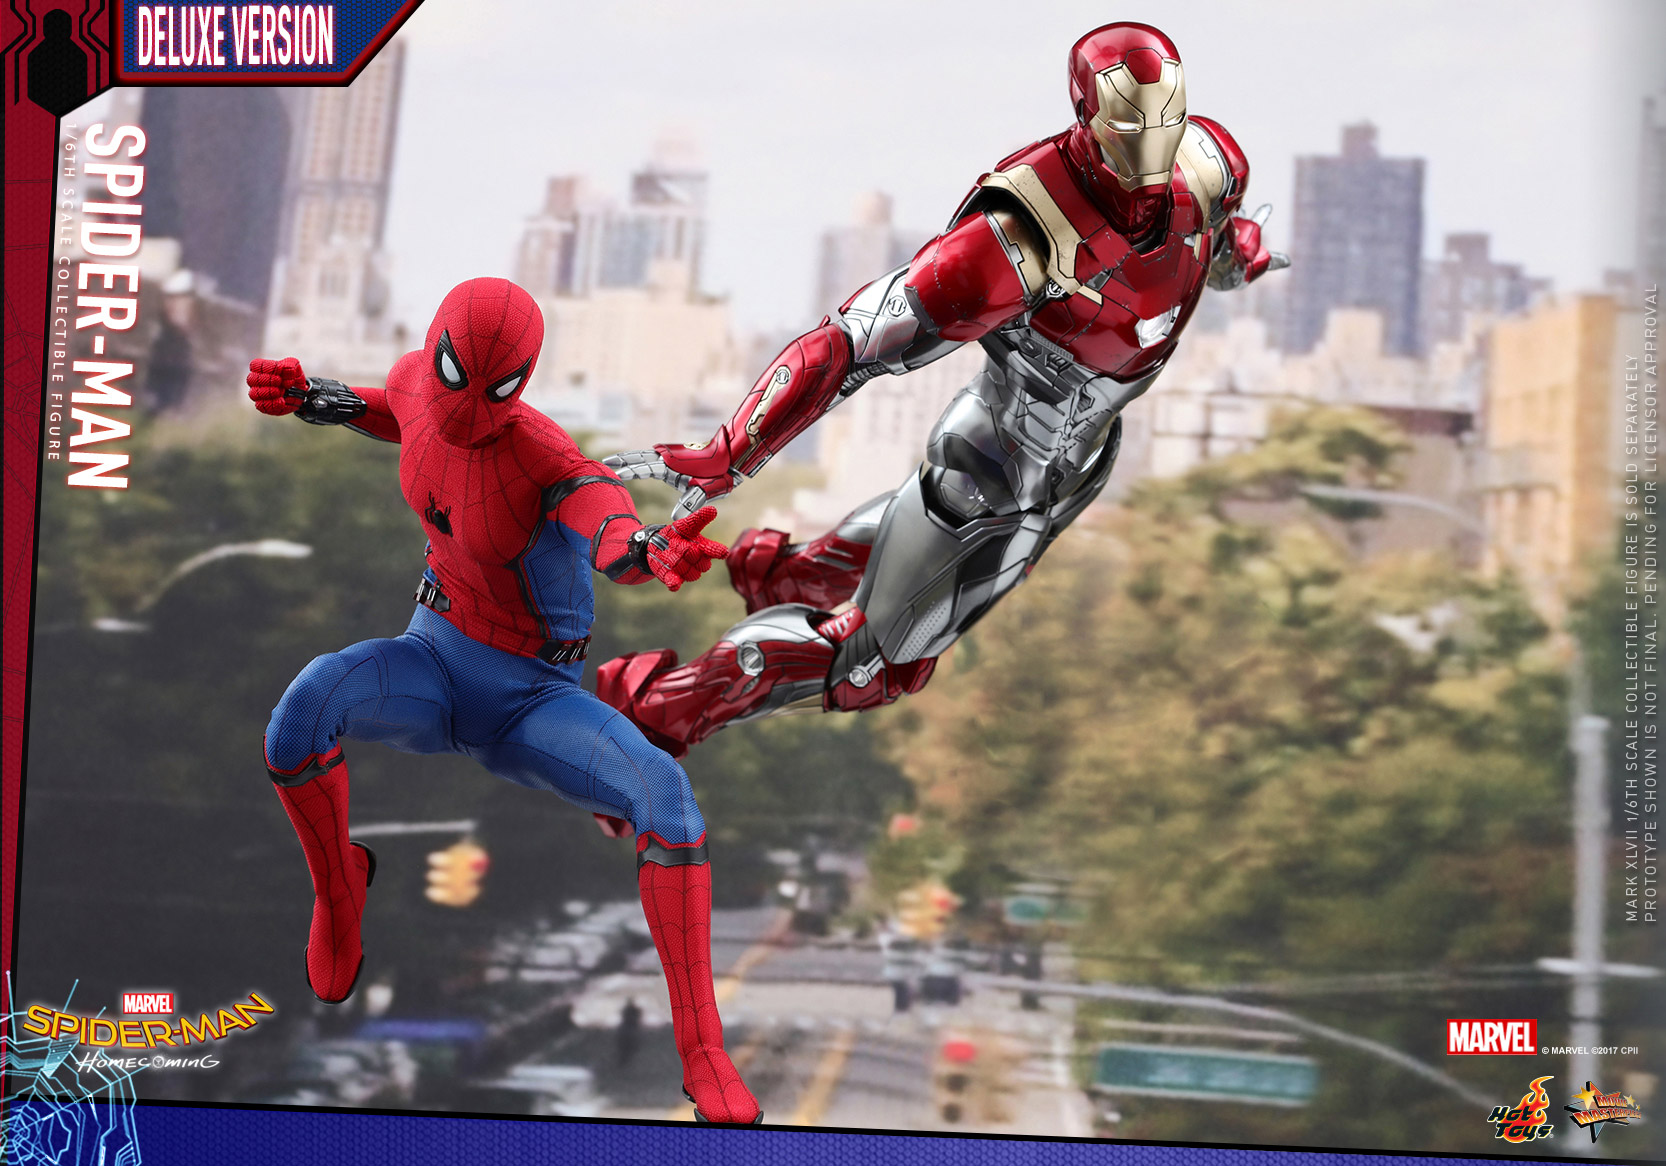 Hot-Toys---SMHC---Spider-Man-Collectible-Figure-(Deluxe-Version)_PR15